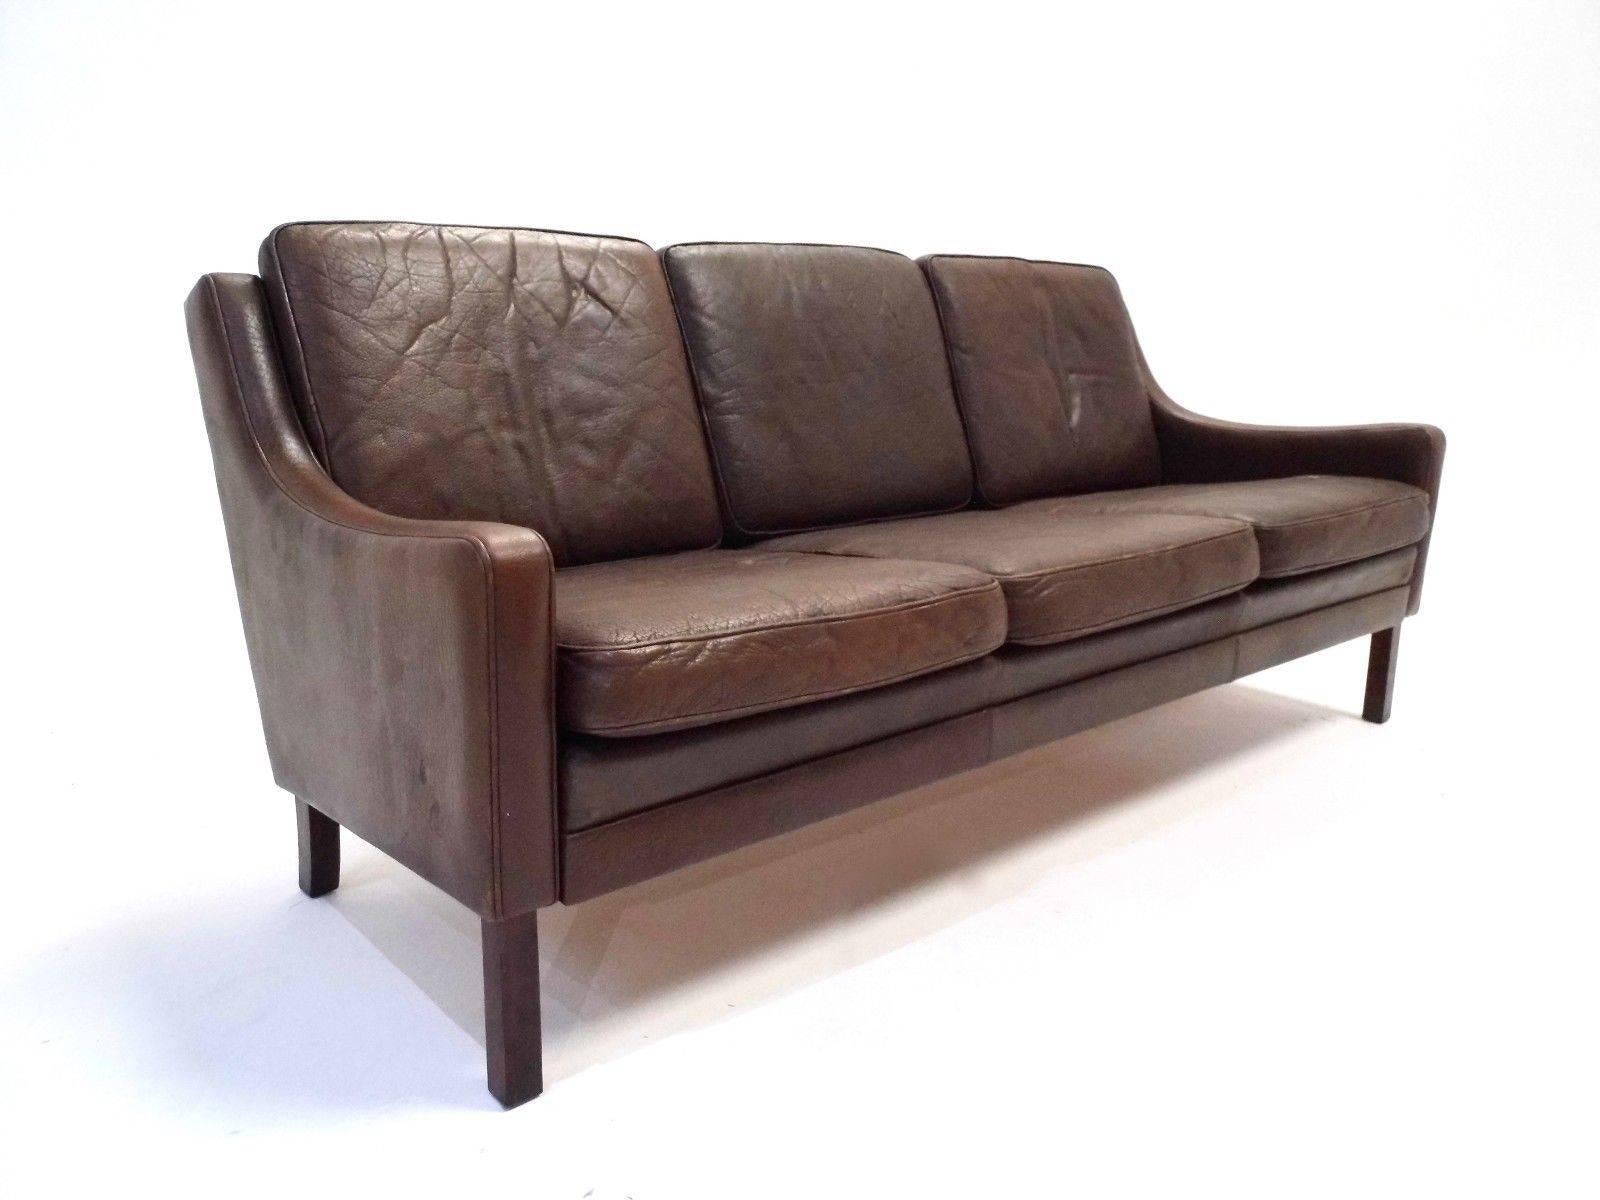 A beautiful Danish dark brown leather three-seat sofa, this would make a stylish addition to any living or work area. The sofa has wide cushions and padded armrests for enhanced comfort. A striking piece of Classic Scandinavian furniture.

The